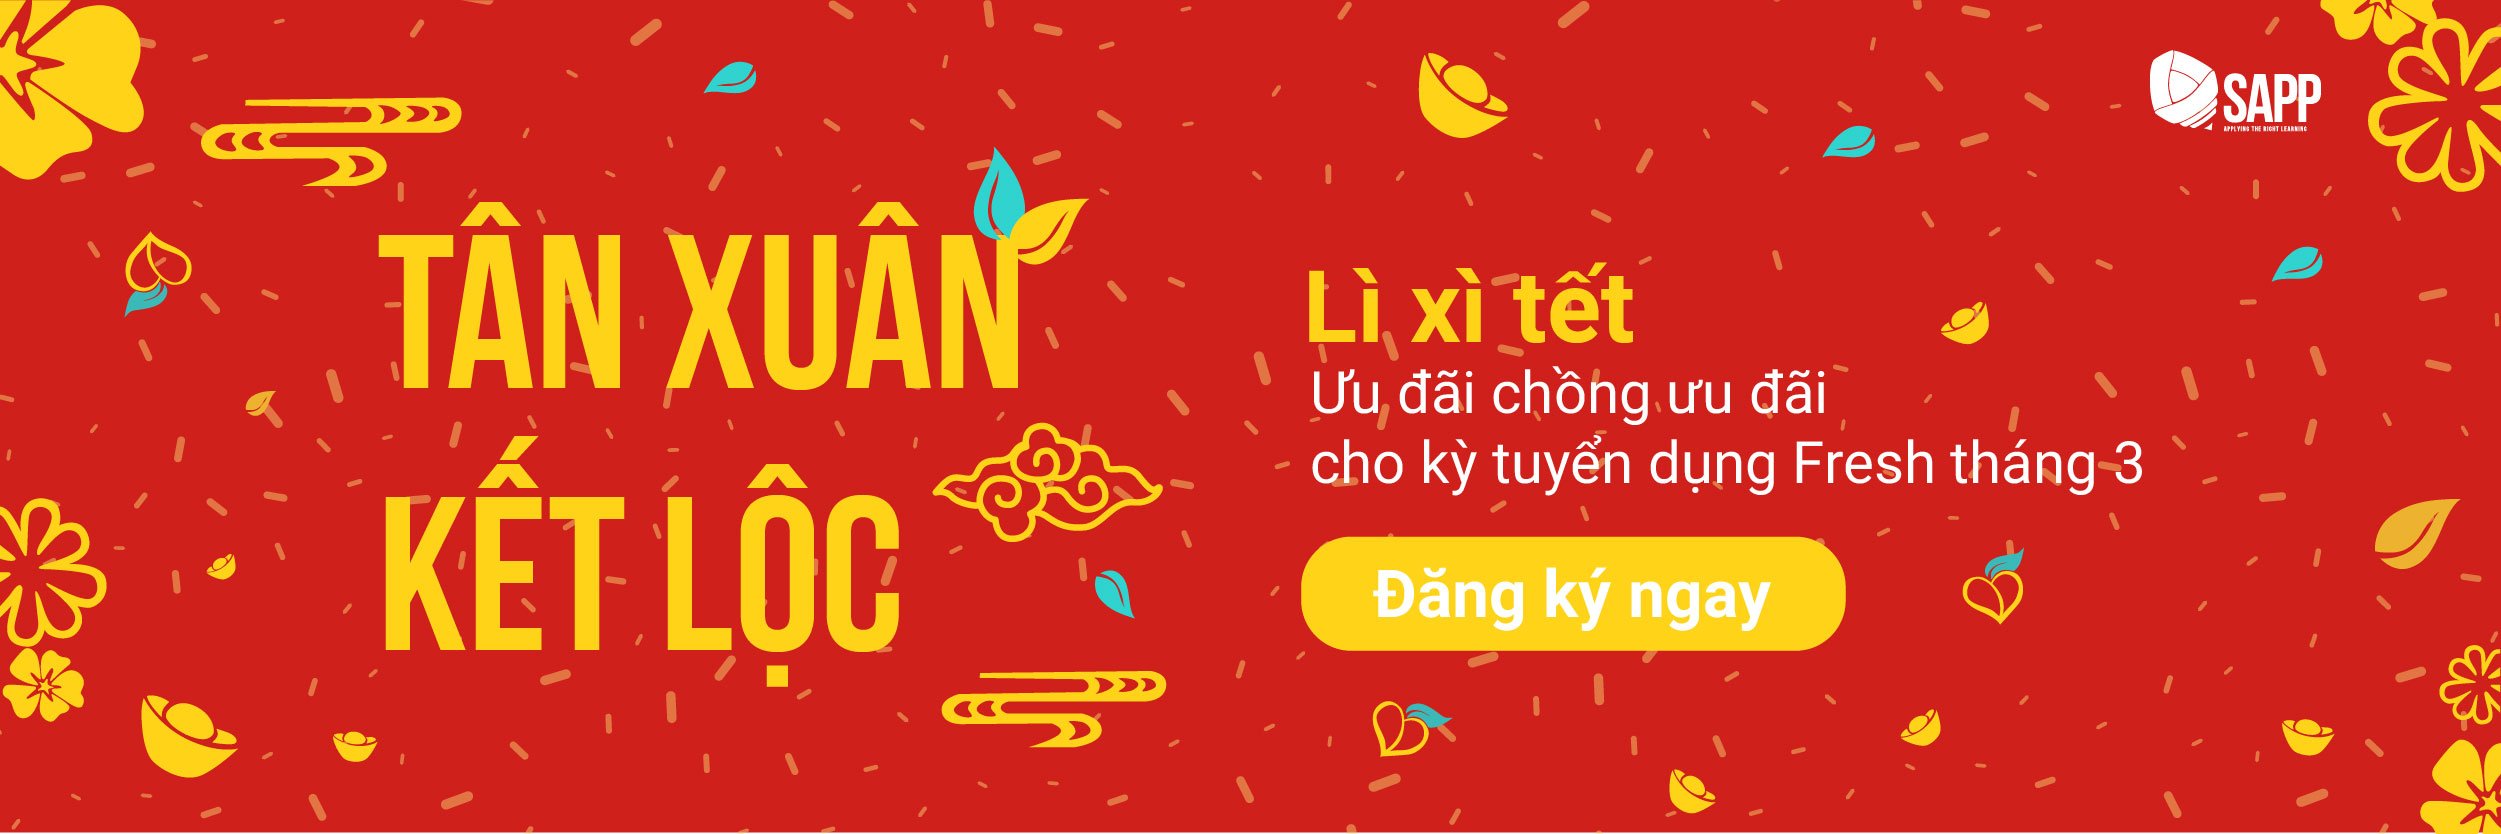 Giang_Email cover_600 x200